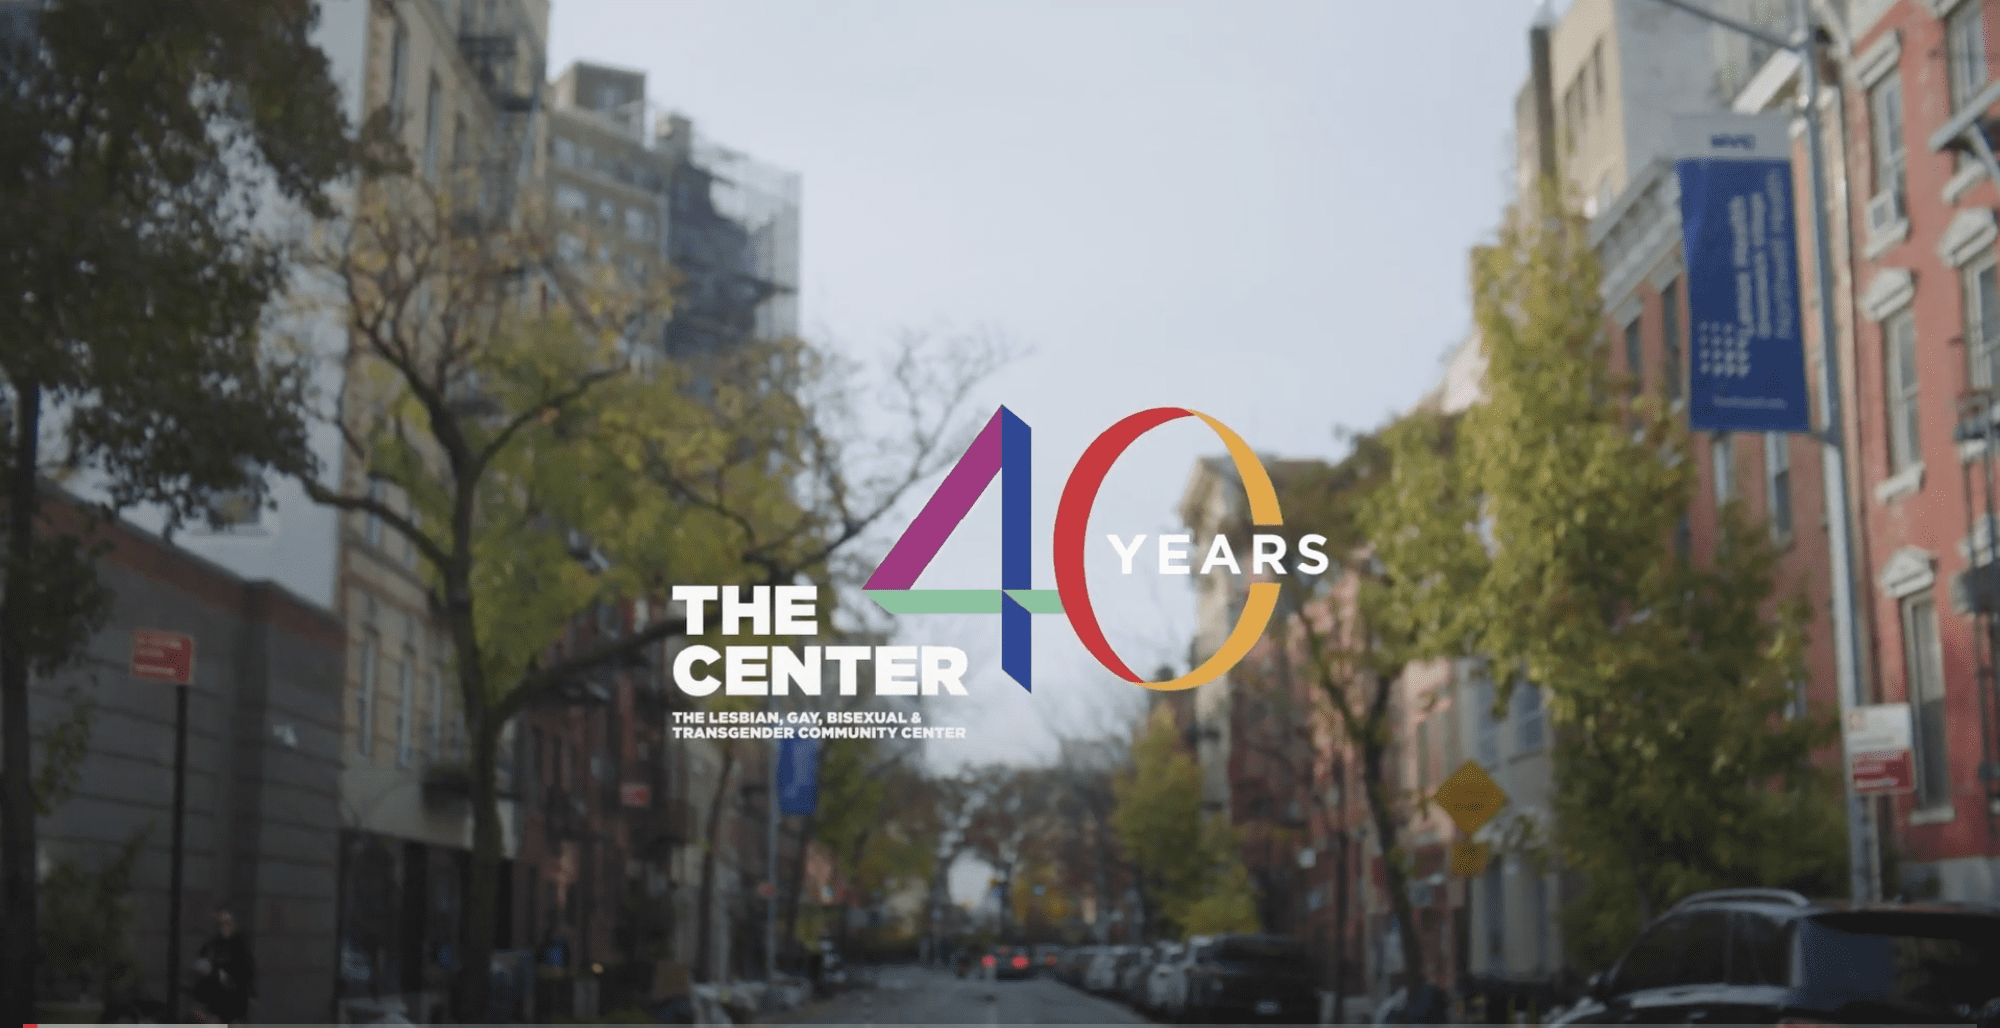 The Lesbian, Gay, Bisexual and Transgender Community Center